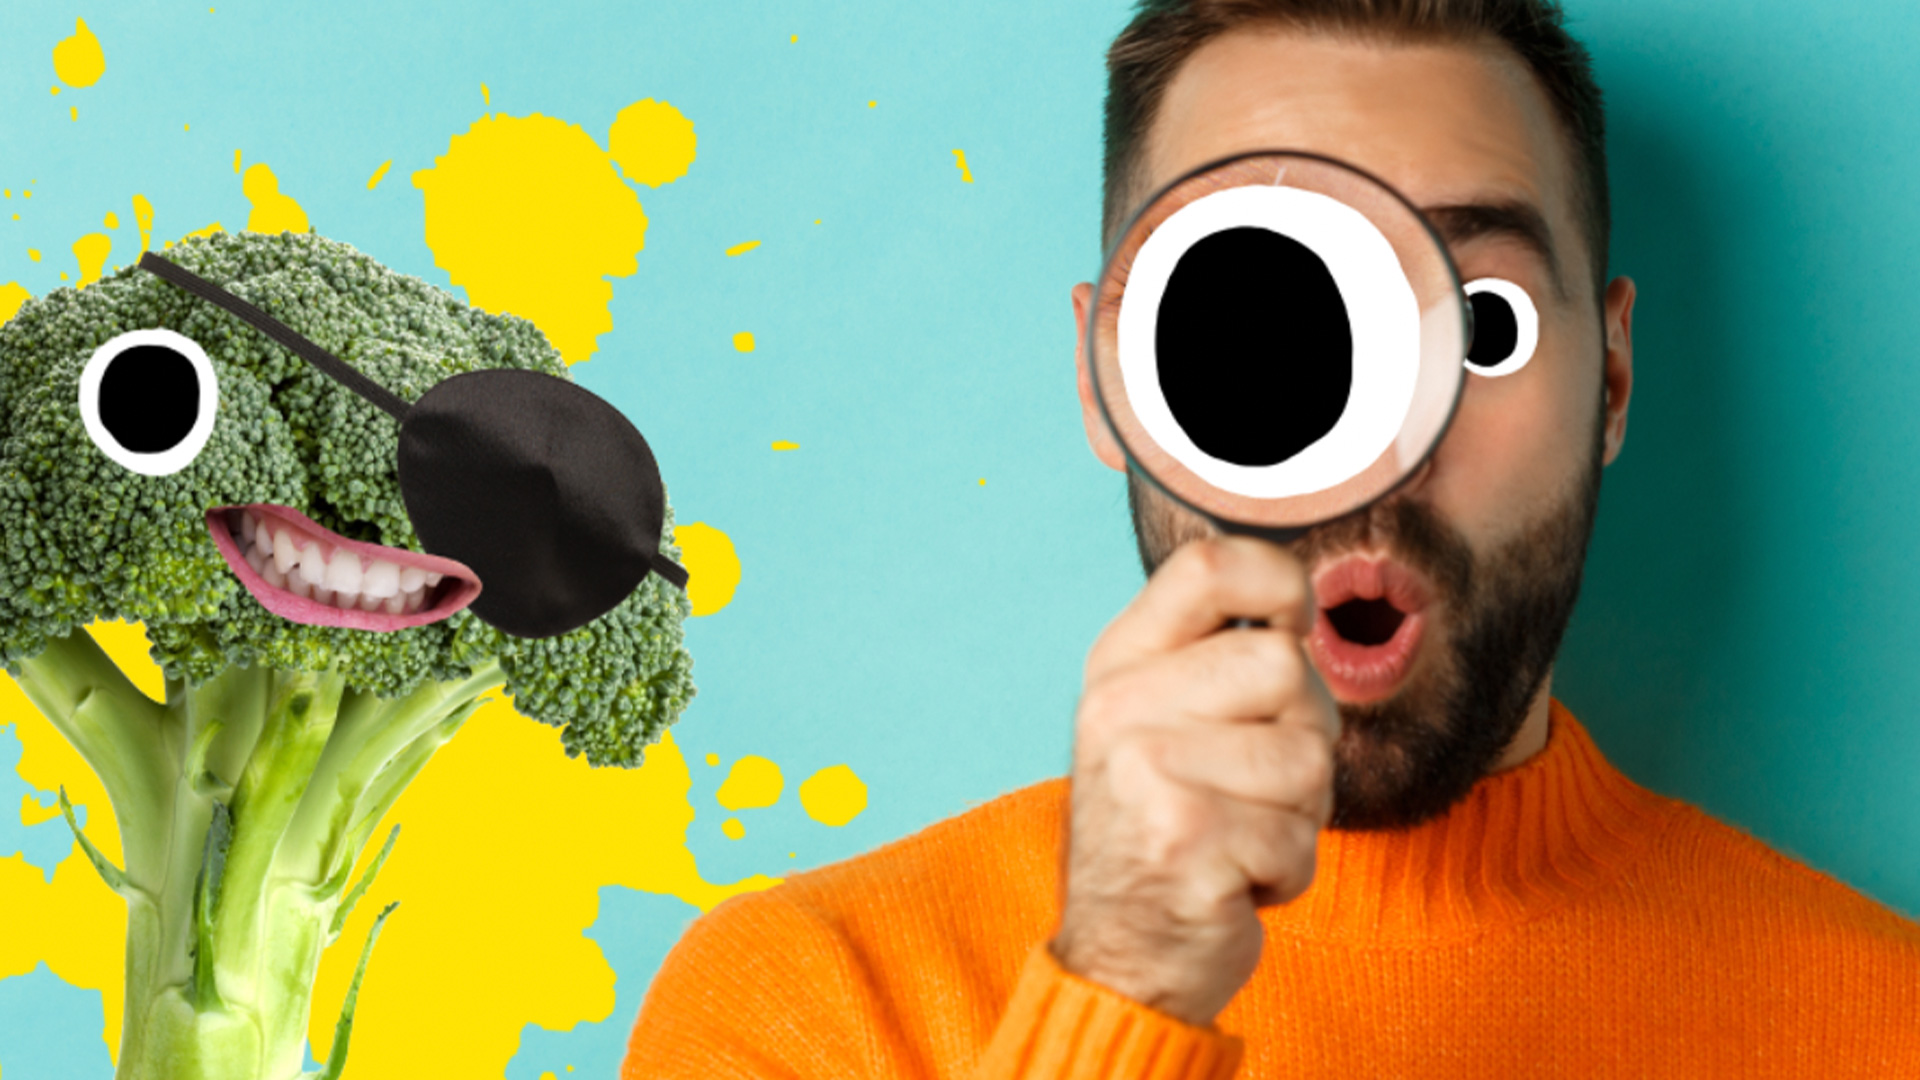 A man looking at broccoli with a magnifying glass